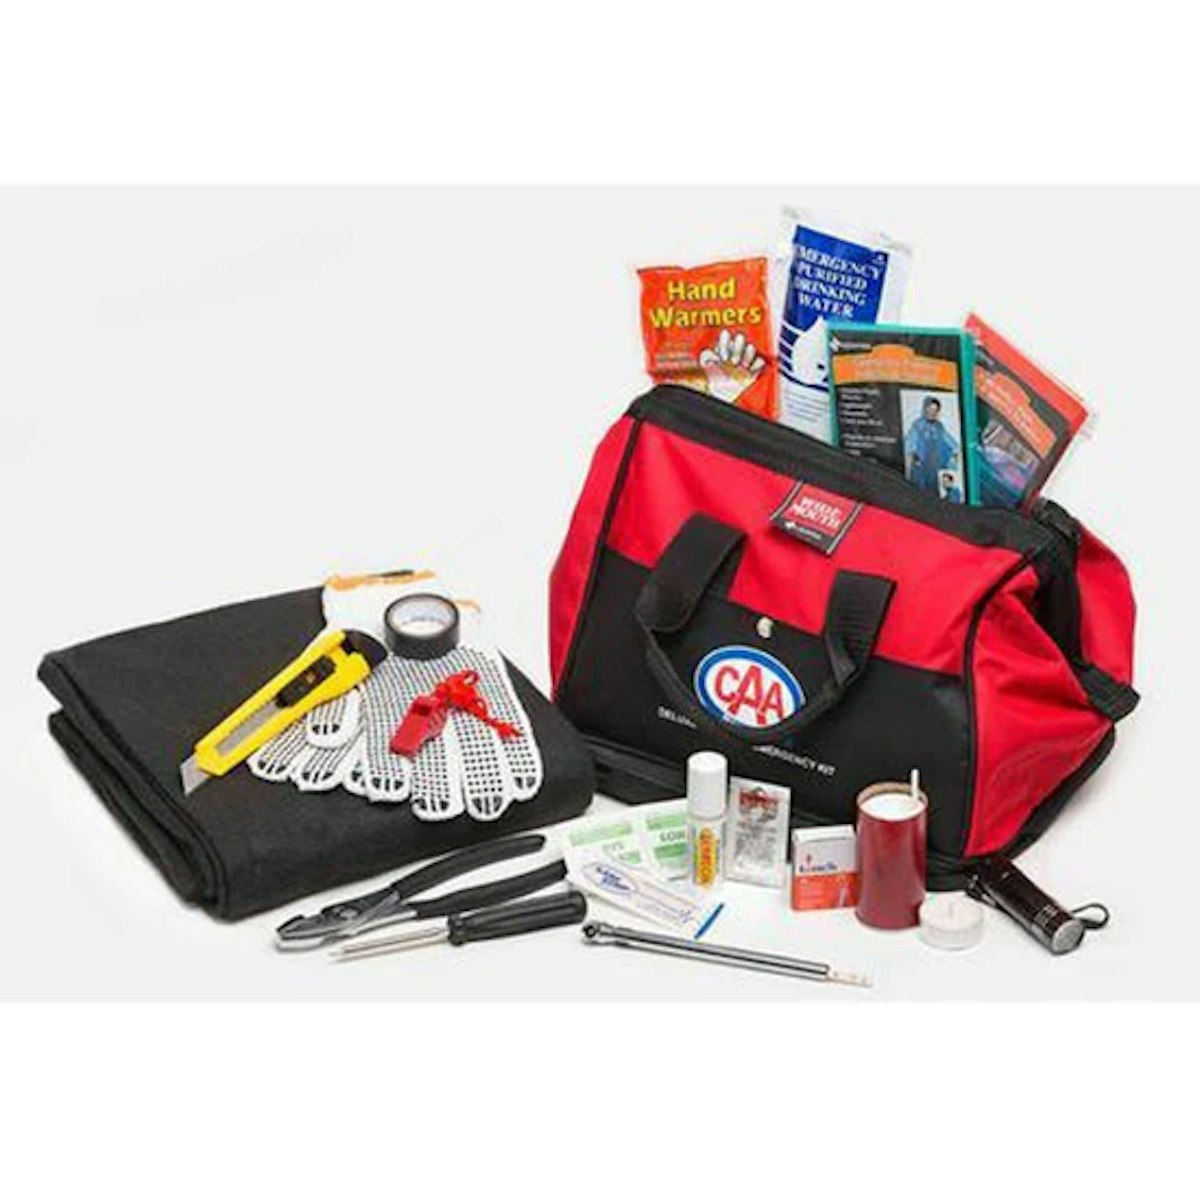 A red and black bag with tools and items.